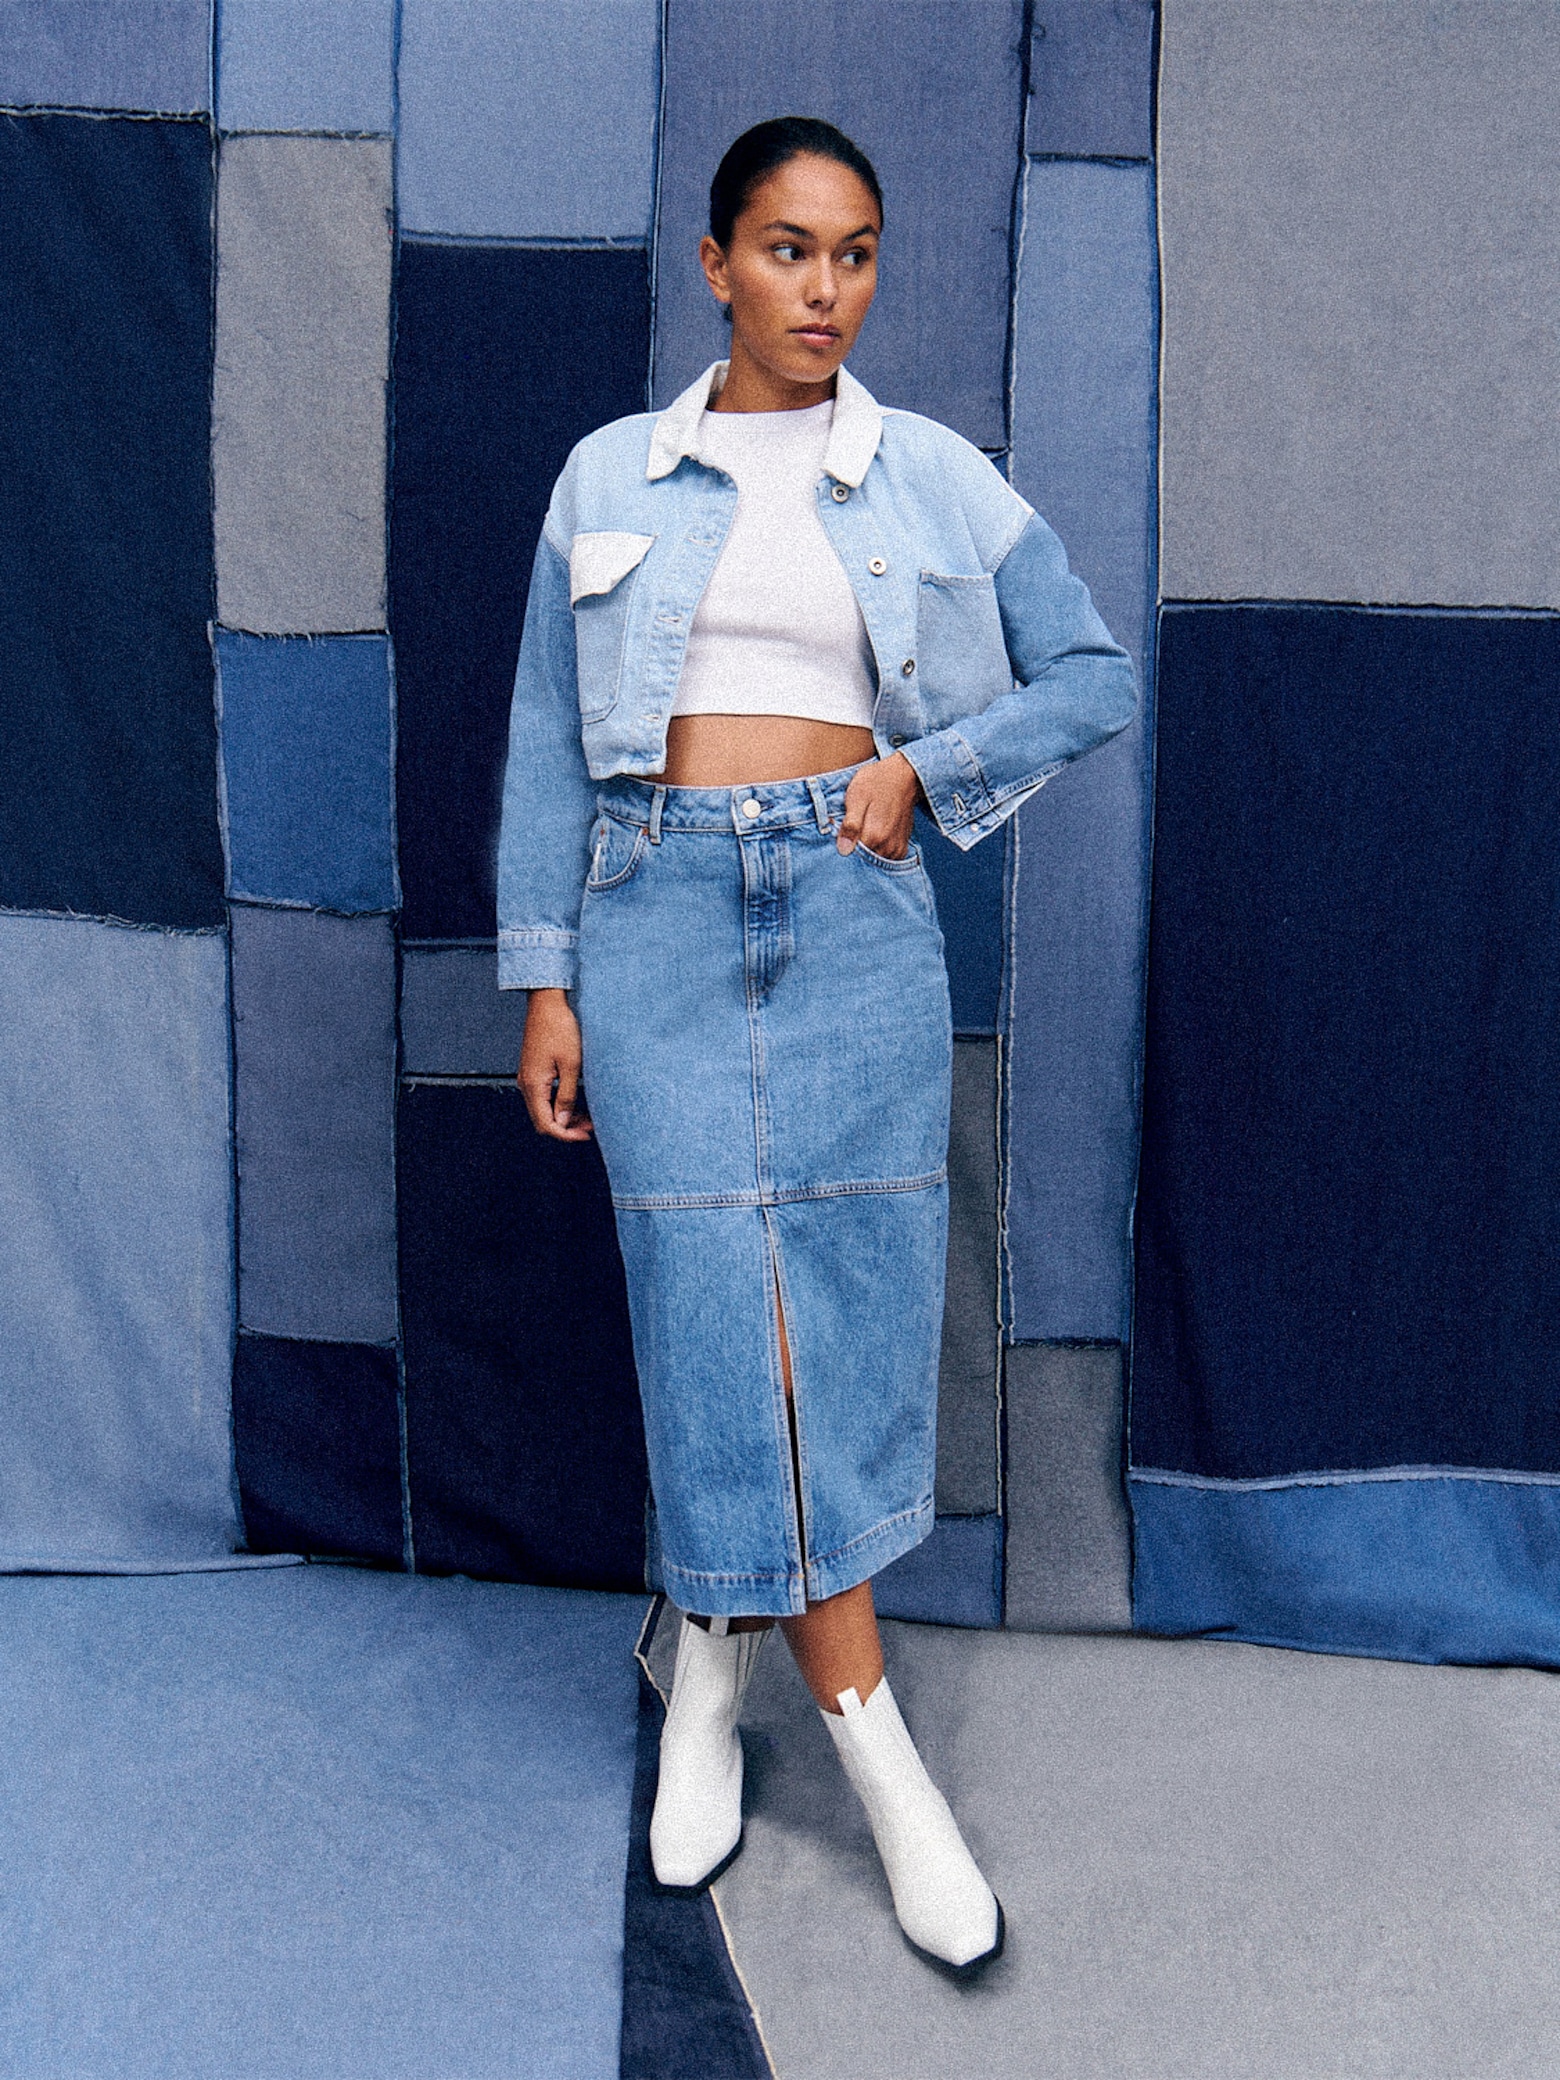 Give your jeans a break Denim skirts